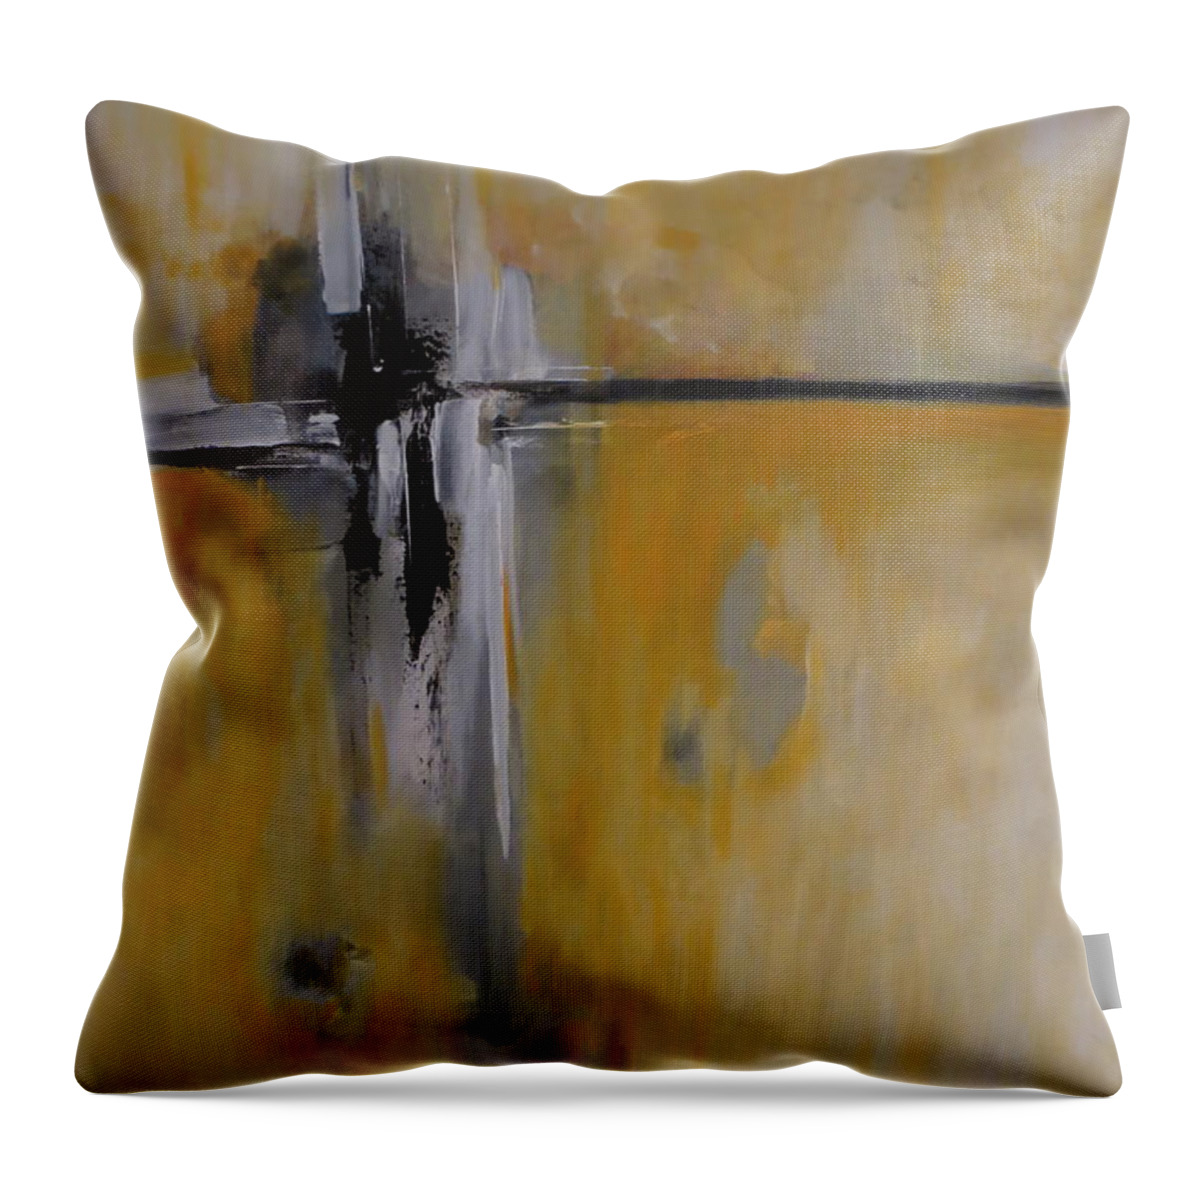 Abstract Throw Pillow featuring the painting Imagine That by Soraya Silvestri